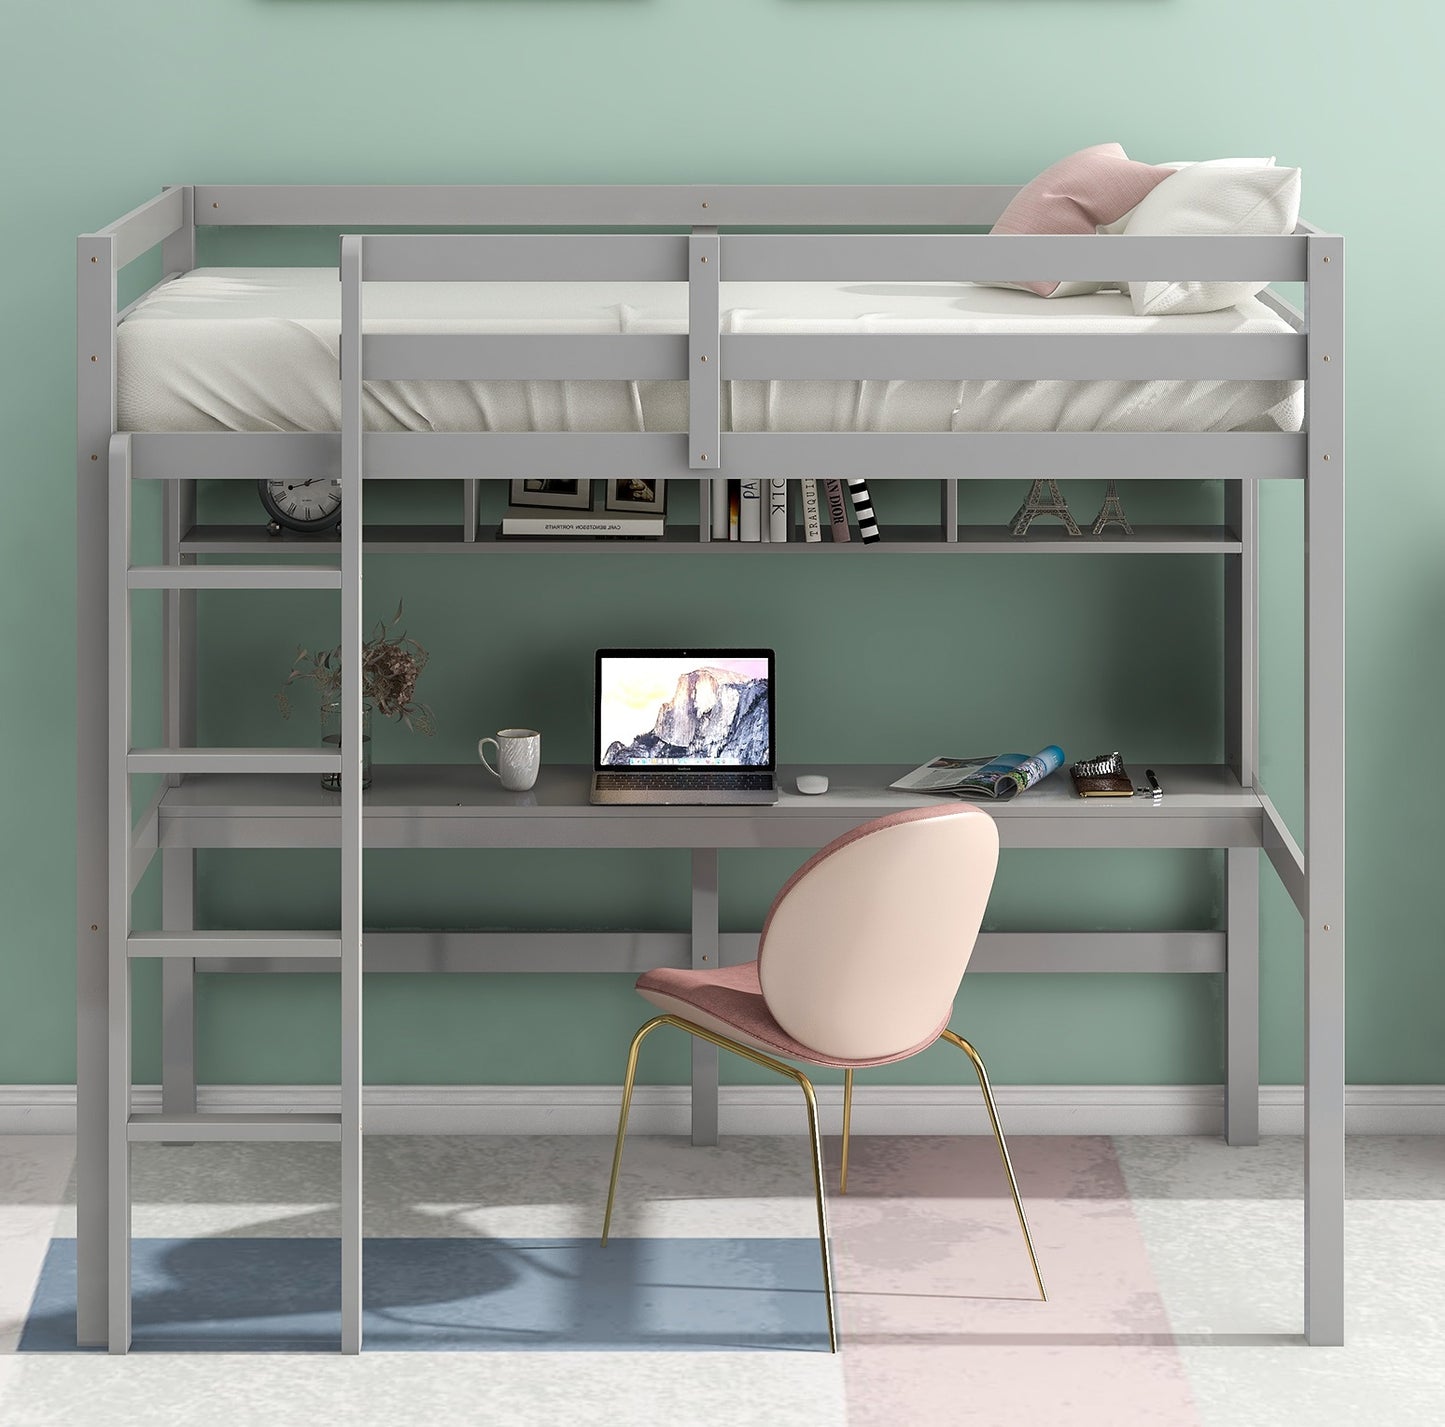 Loft Bed with Desk for Kids, Solid Pine Wood Twin Loft Bunk Bed Frame with Ladder and Built-in Desk for Boys Girls Teens Adults, No Box Spring Needed, White, LJ647